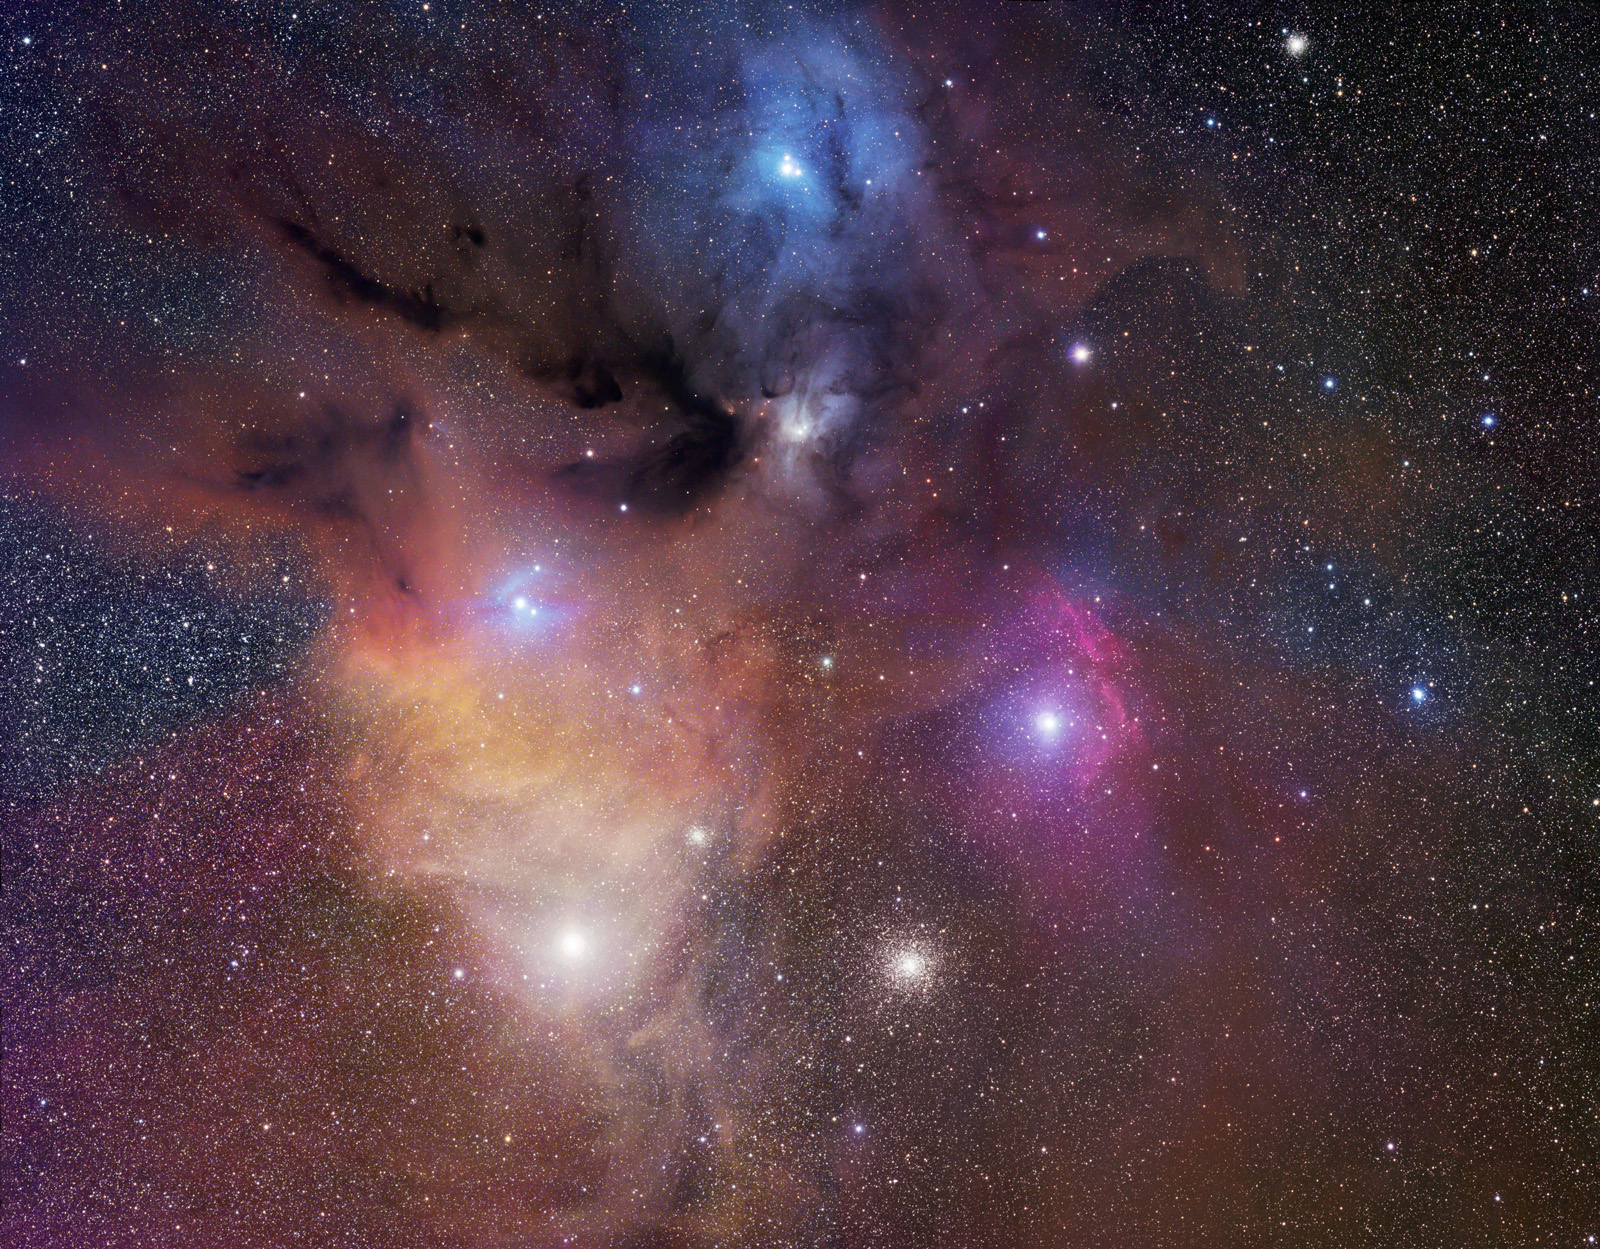 APOD: 2006 July 14 - The Colorful Clouds of Rho Ophiuchi